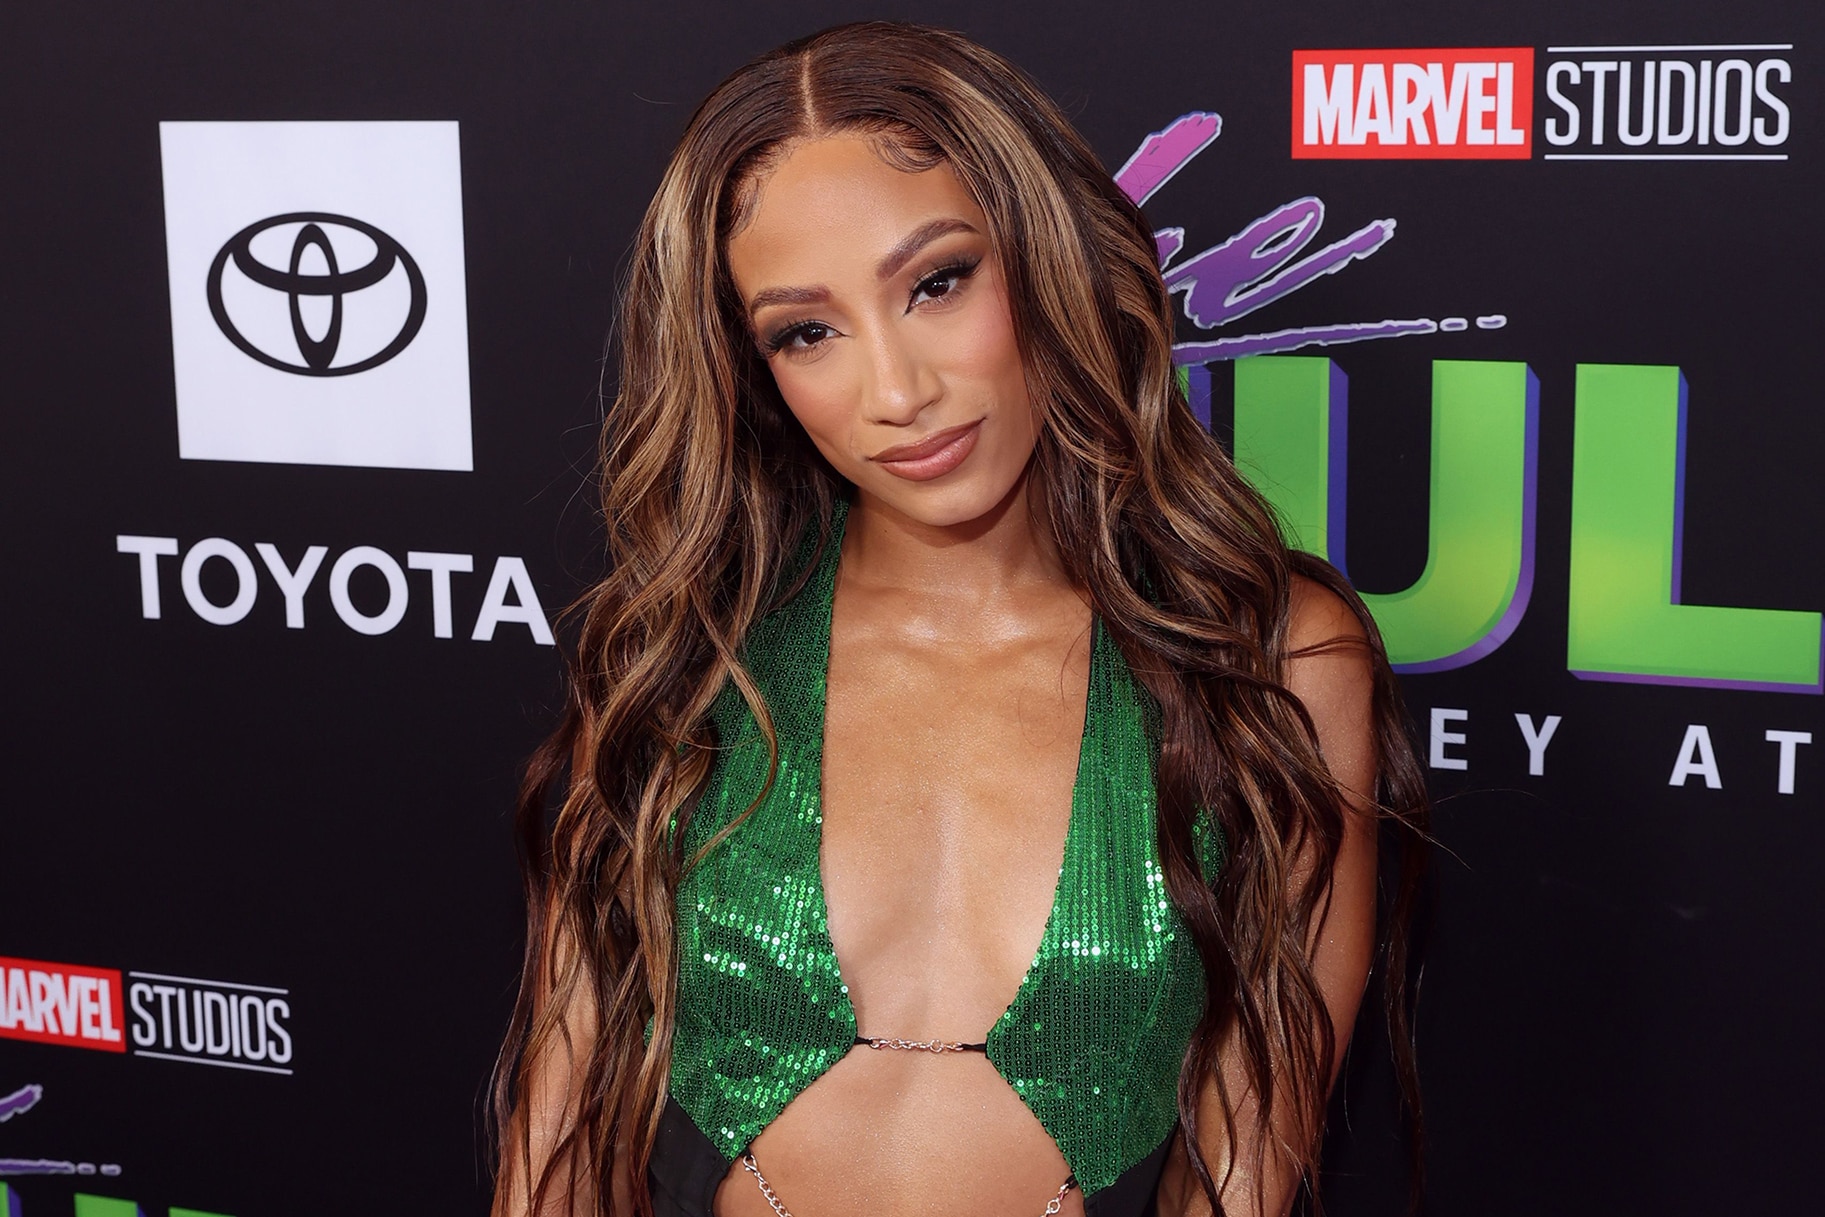 Sasha Banks attends the world premiere of Marvel Studios' upcoming new series